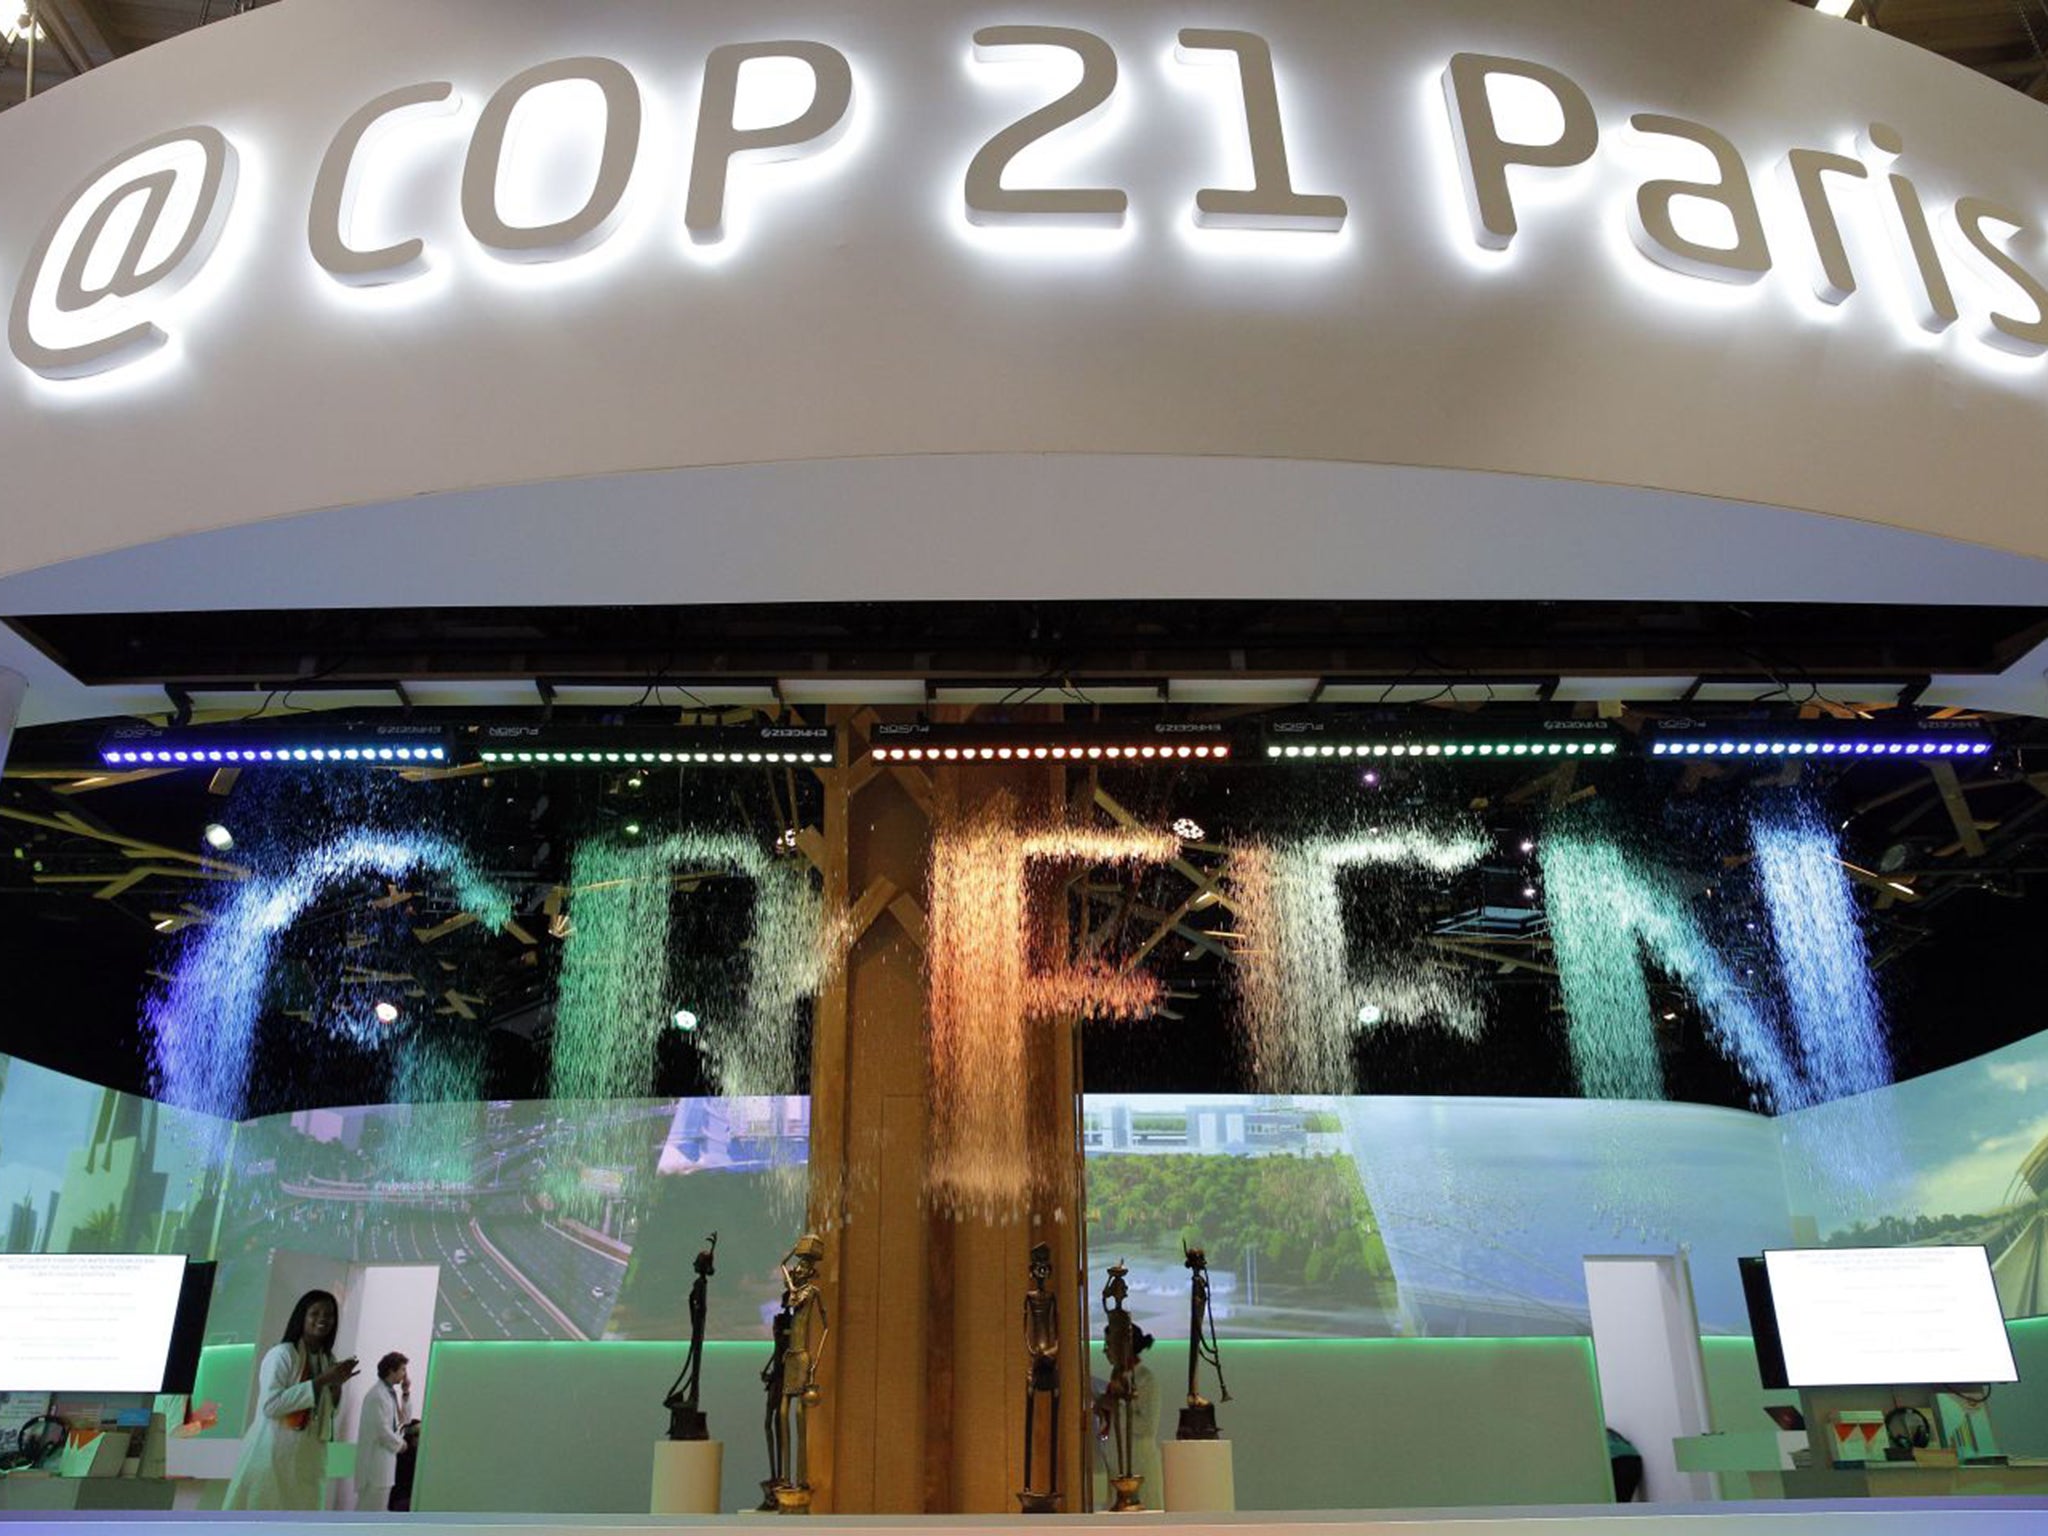 The Paris Treaty committed countries to zero emissions by the second half of the 21st century